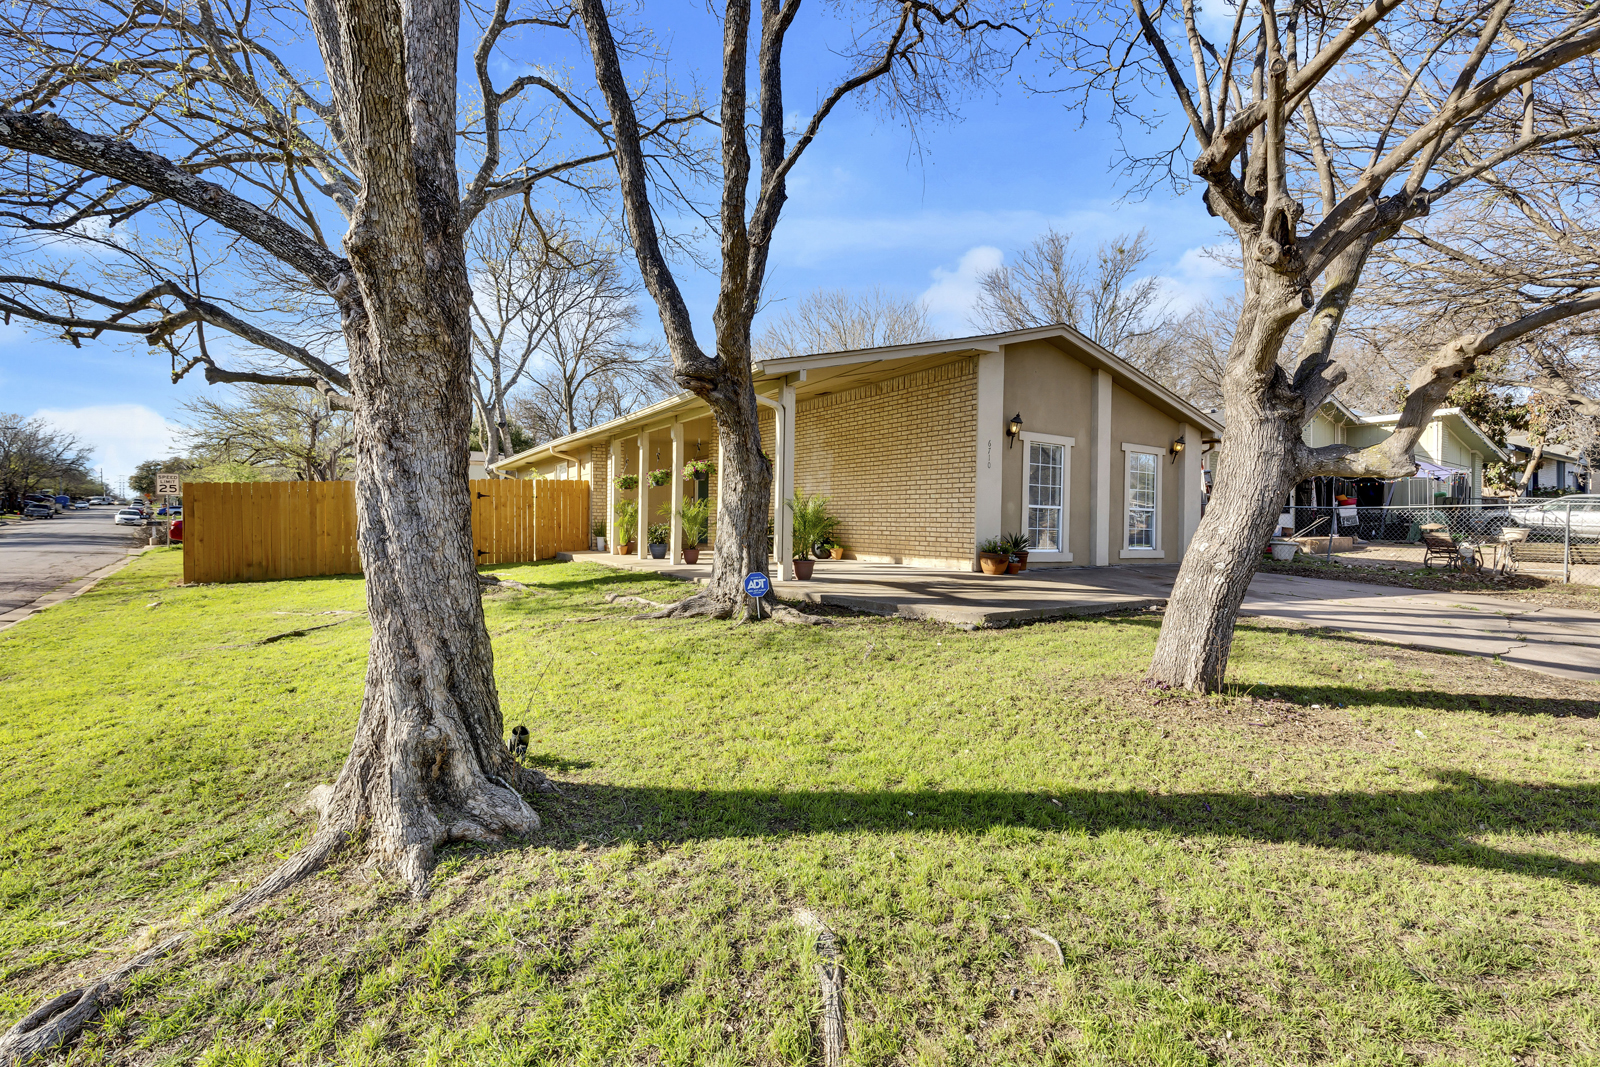 buying a home in austin texas sunny day real estate.